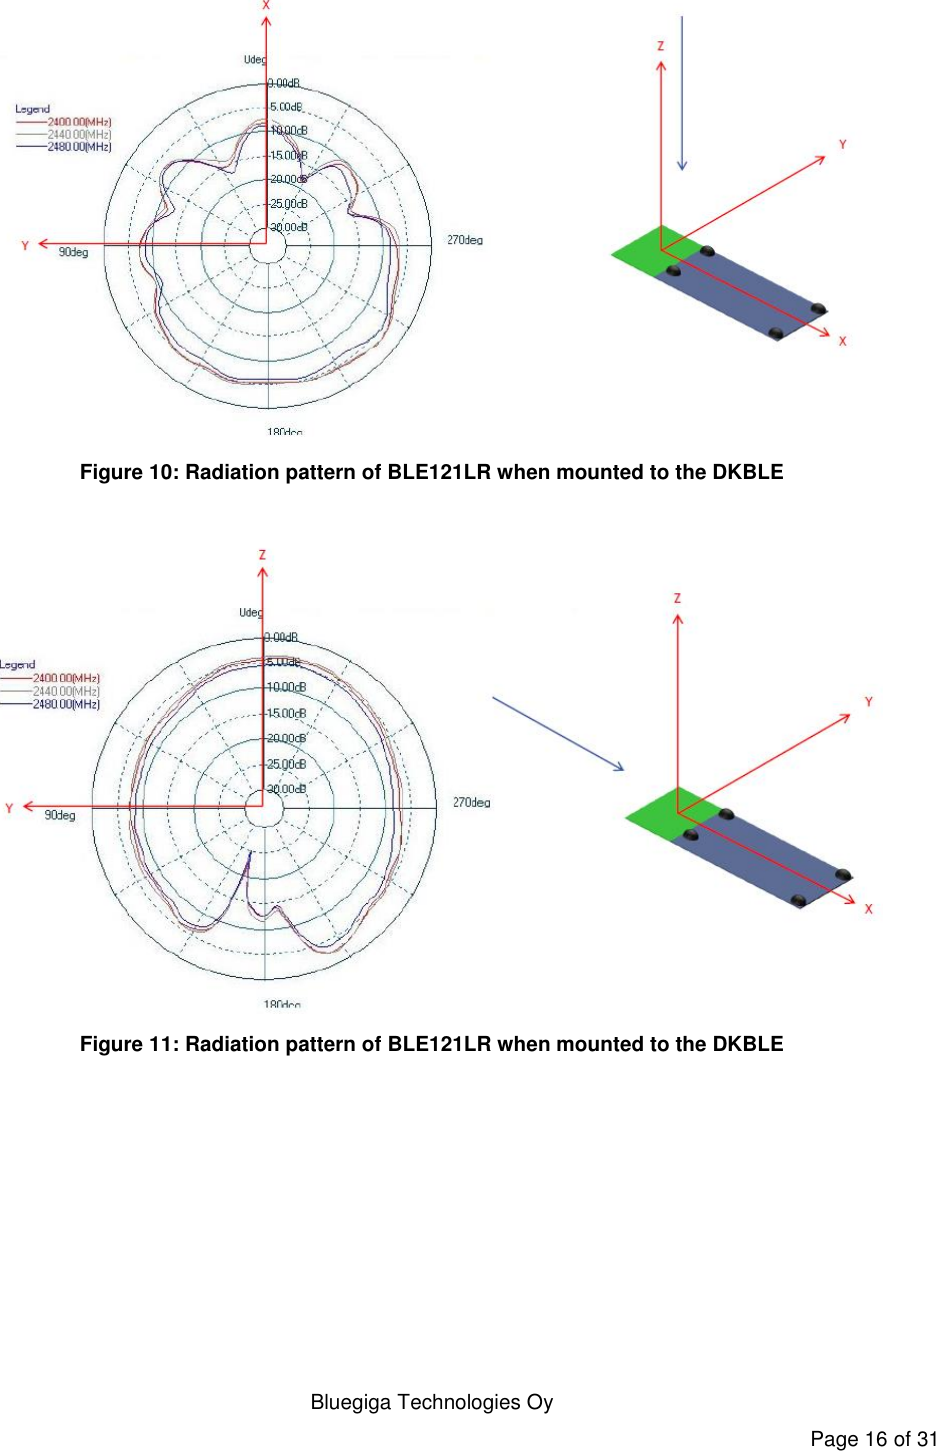   Bluegiga Technologies Oy Page 16 of 31  Figure 10: Radiation pattern of BLE121LR when mounted to the DKBLE   Figure 11: Radiation pattern of BLE121LR when mounted to the DKBLE   